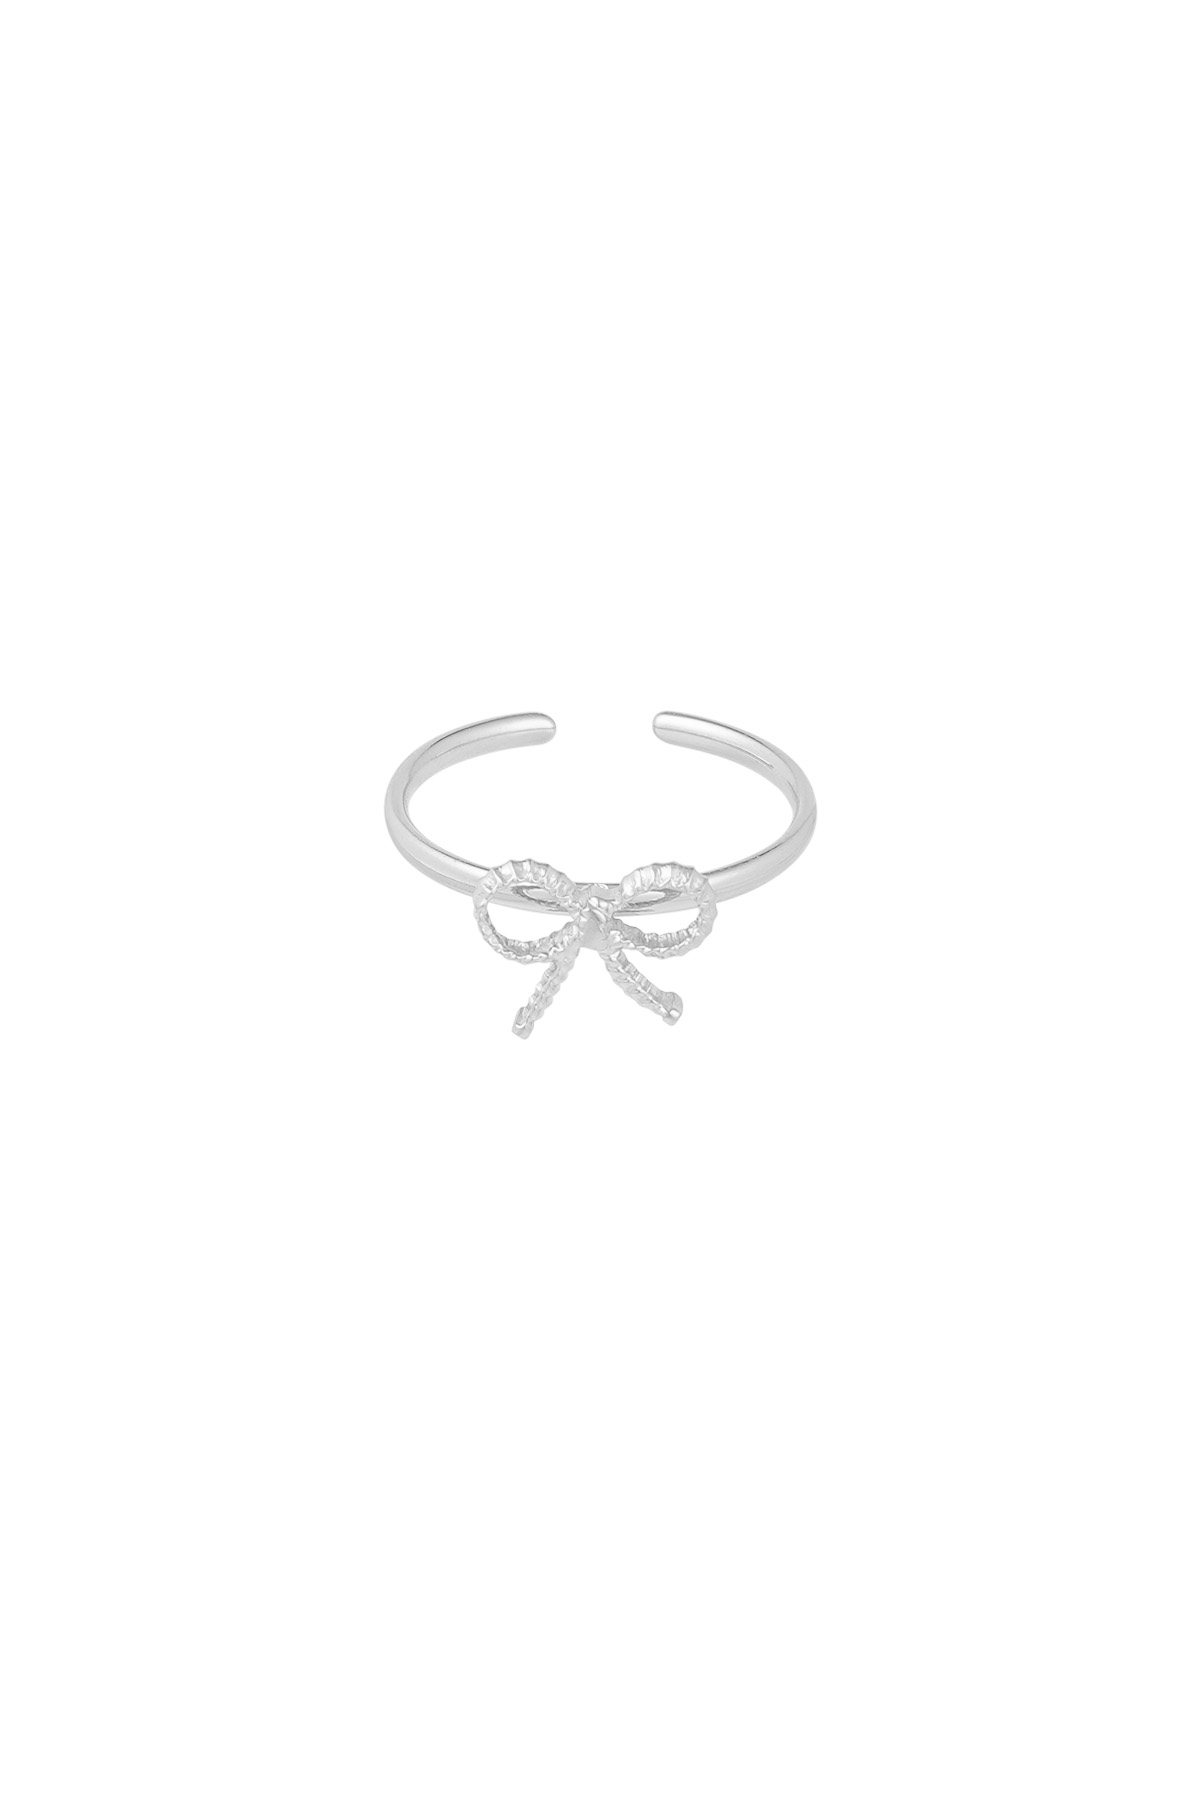 Ring bow basic - zilver Afbeelding3